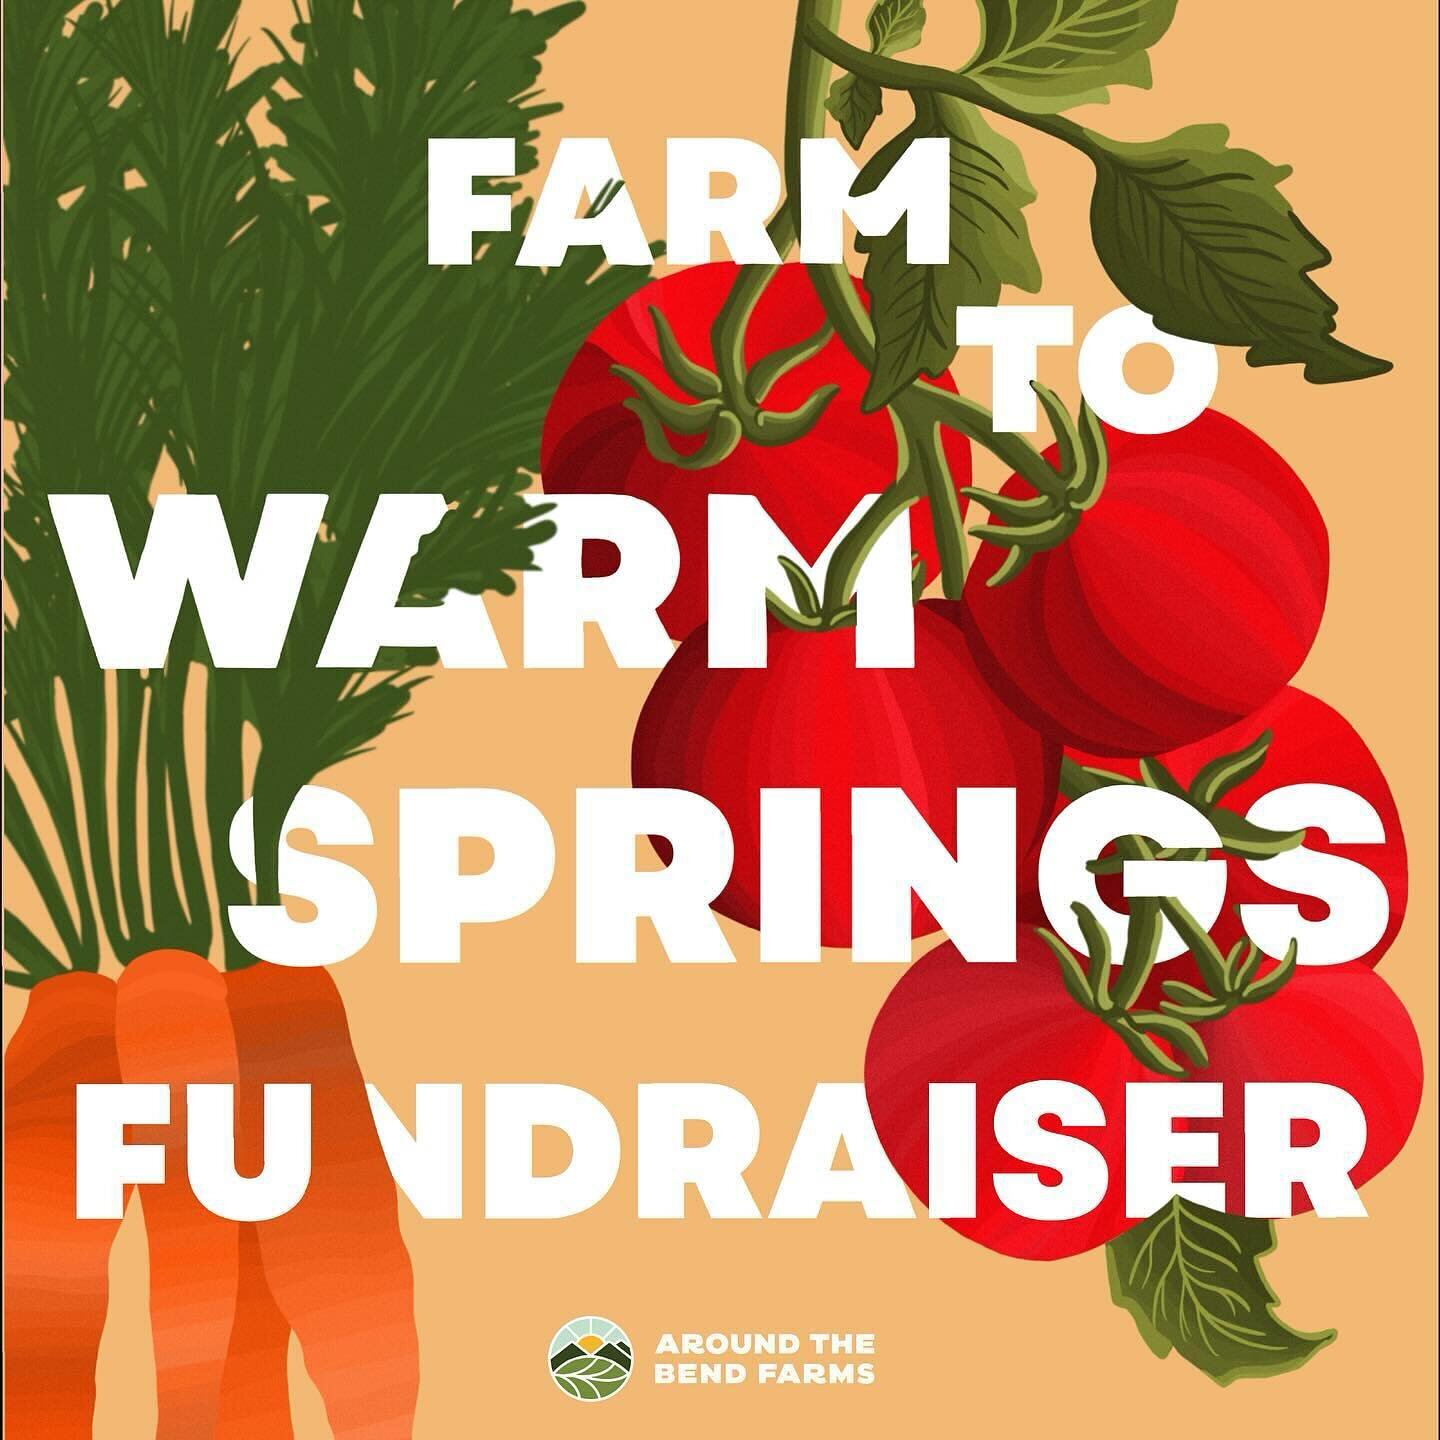 Next Studios is a proud sponsor for Around the Bend Farm&rsquo;s fundraiser TONIGHT! The event is to raise funds for their food security project and bring fresh, local, and sustainable produce to the Warm Springs Tribes. 

It&rsquo;s not too late to 